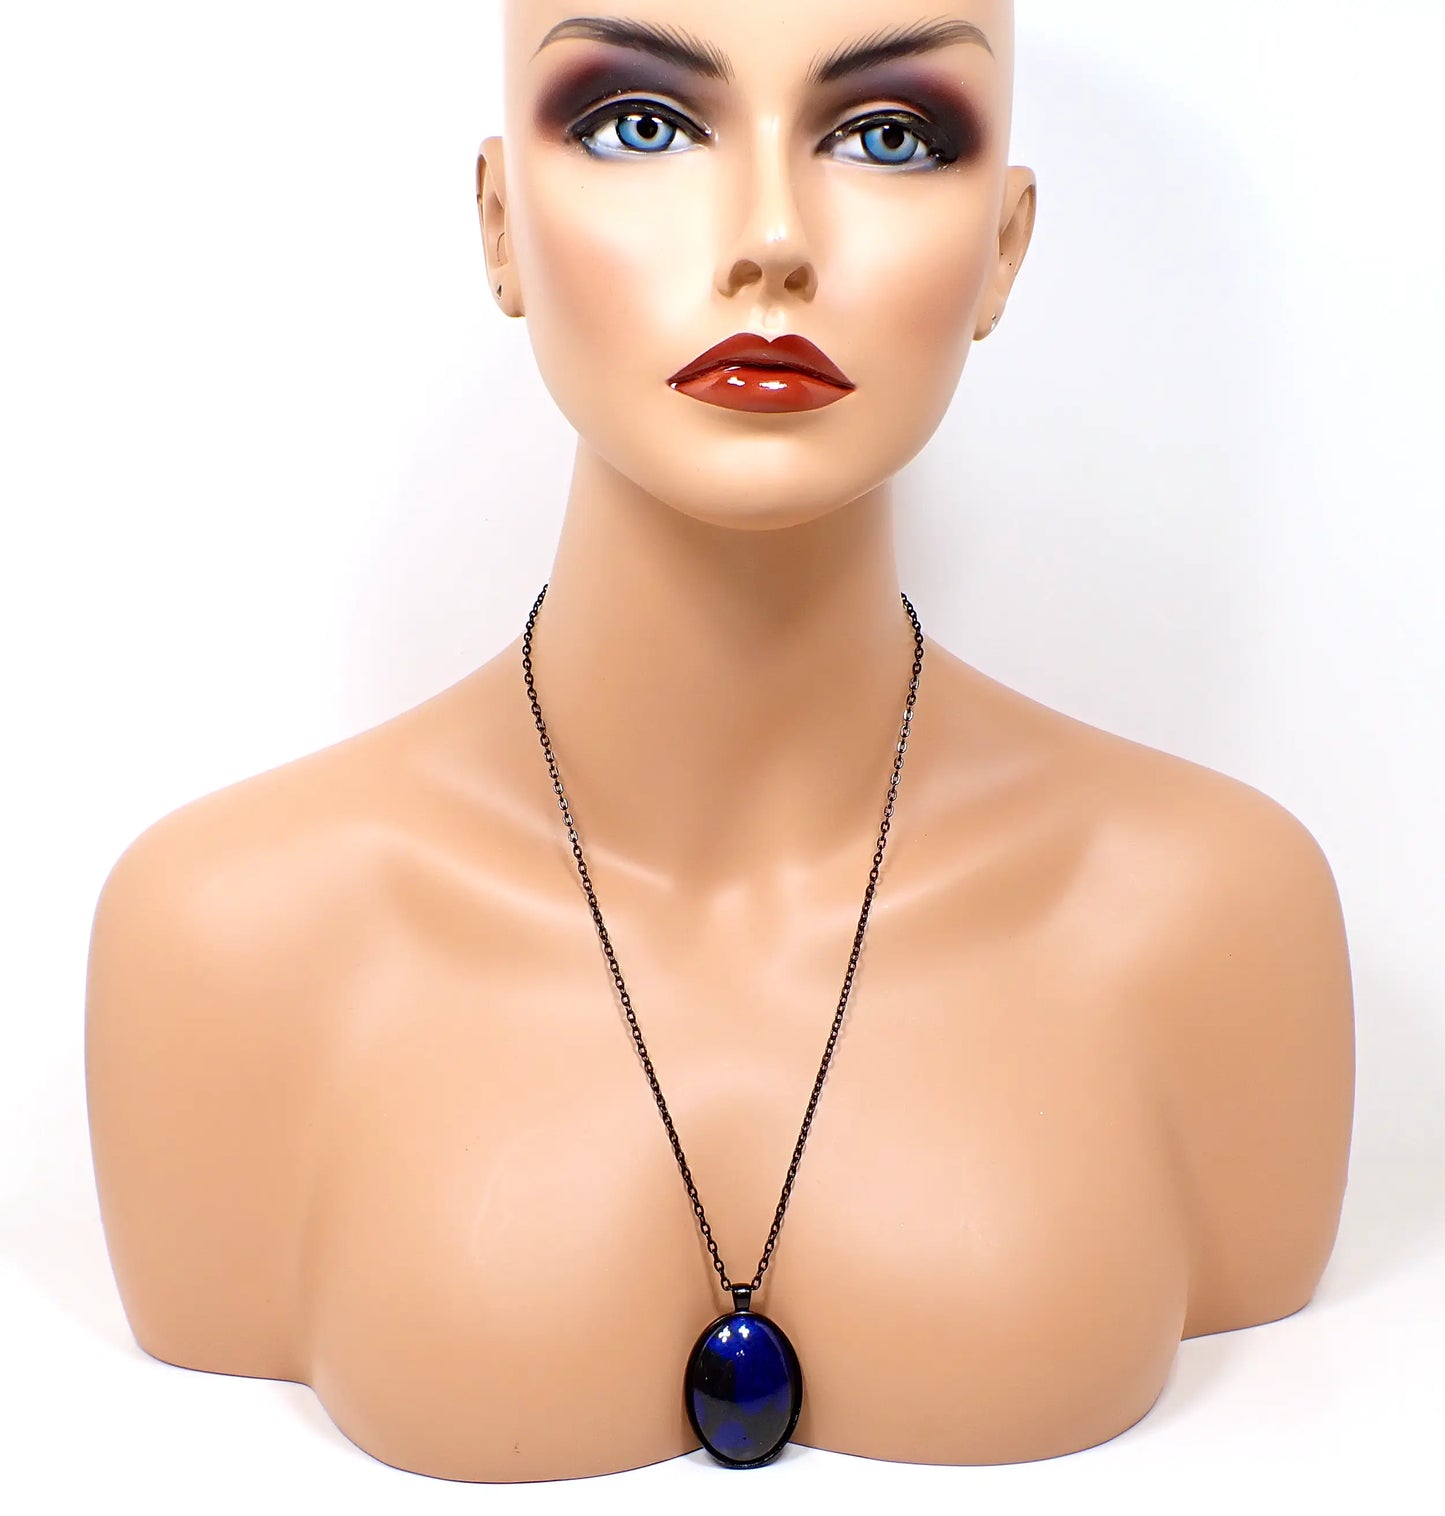 Big Goth Handmade Black and Blue Resin Oval Pendant Necklace